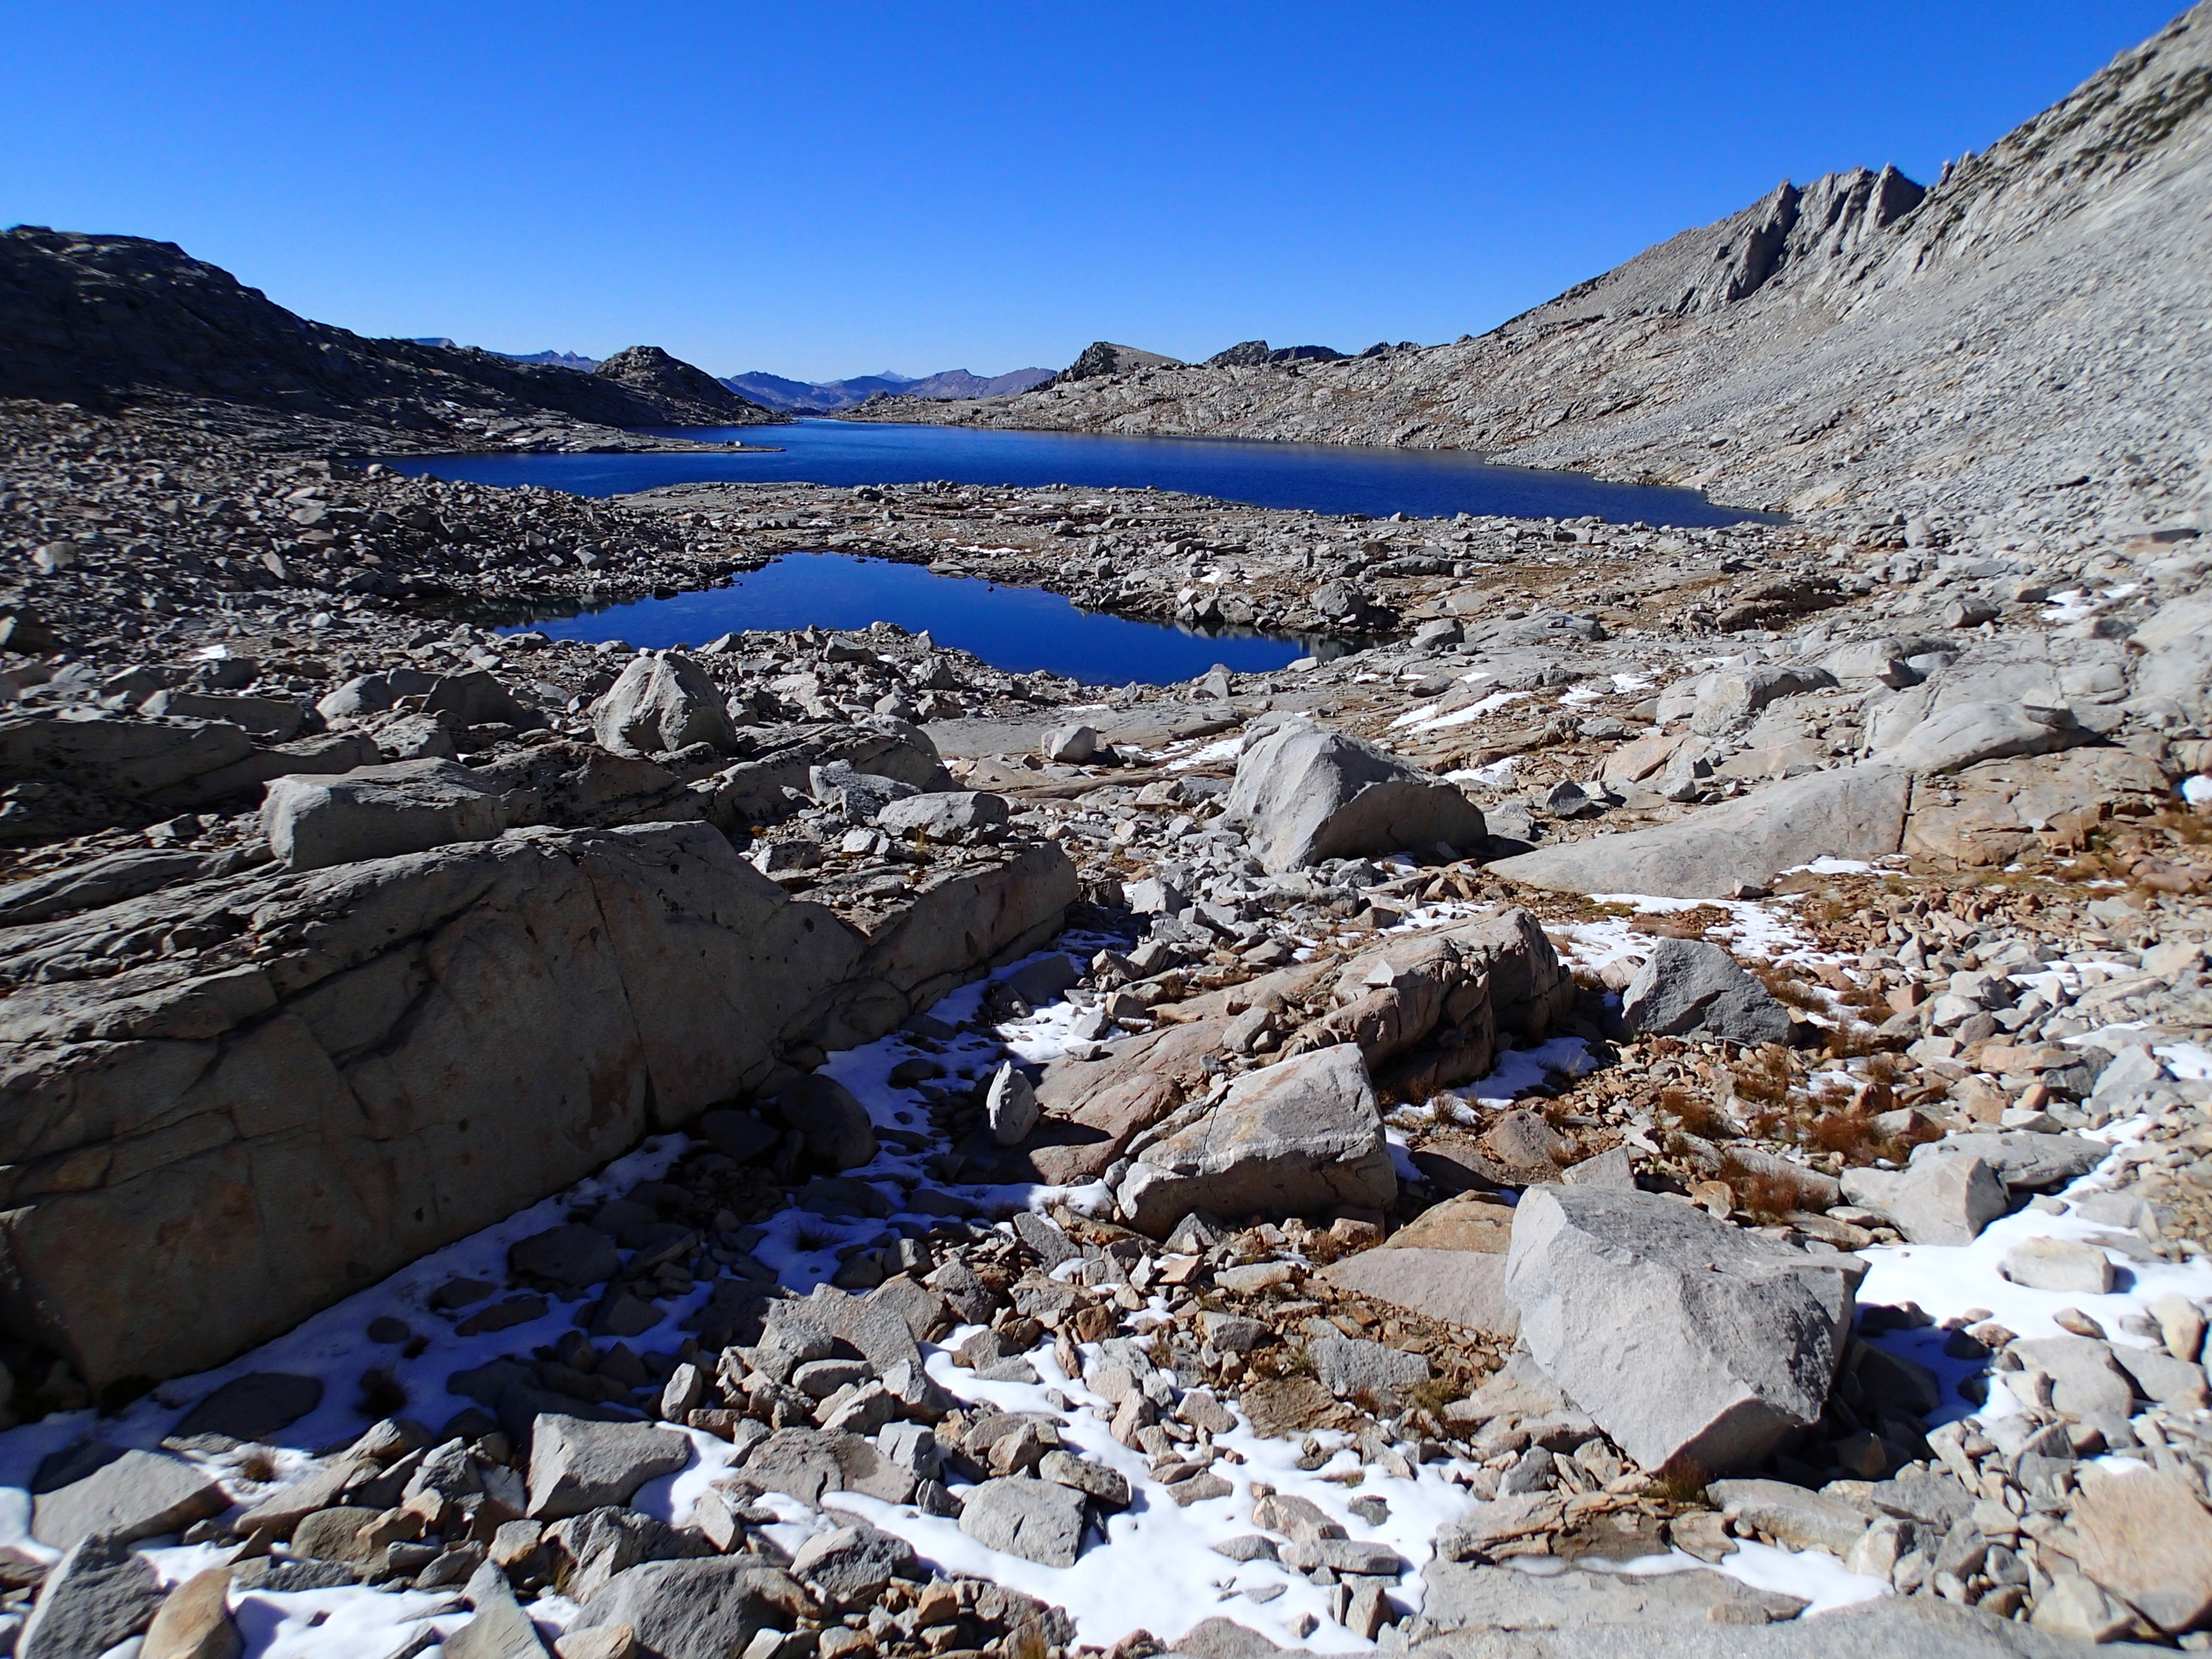 Day4 Upper Gardiner Basin approaching Lk 11407 from descent W side 60 Lks Col patchy snow clear blue sky.JPG